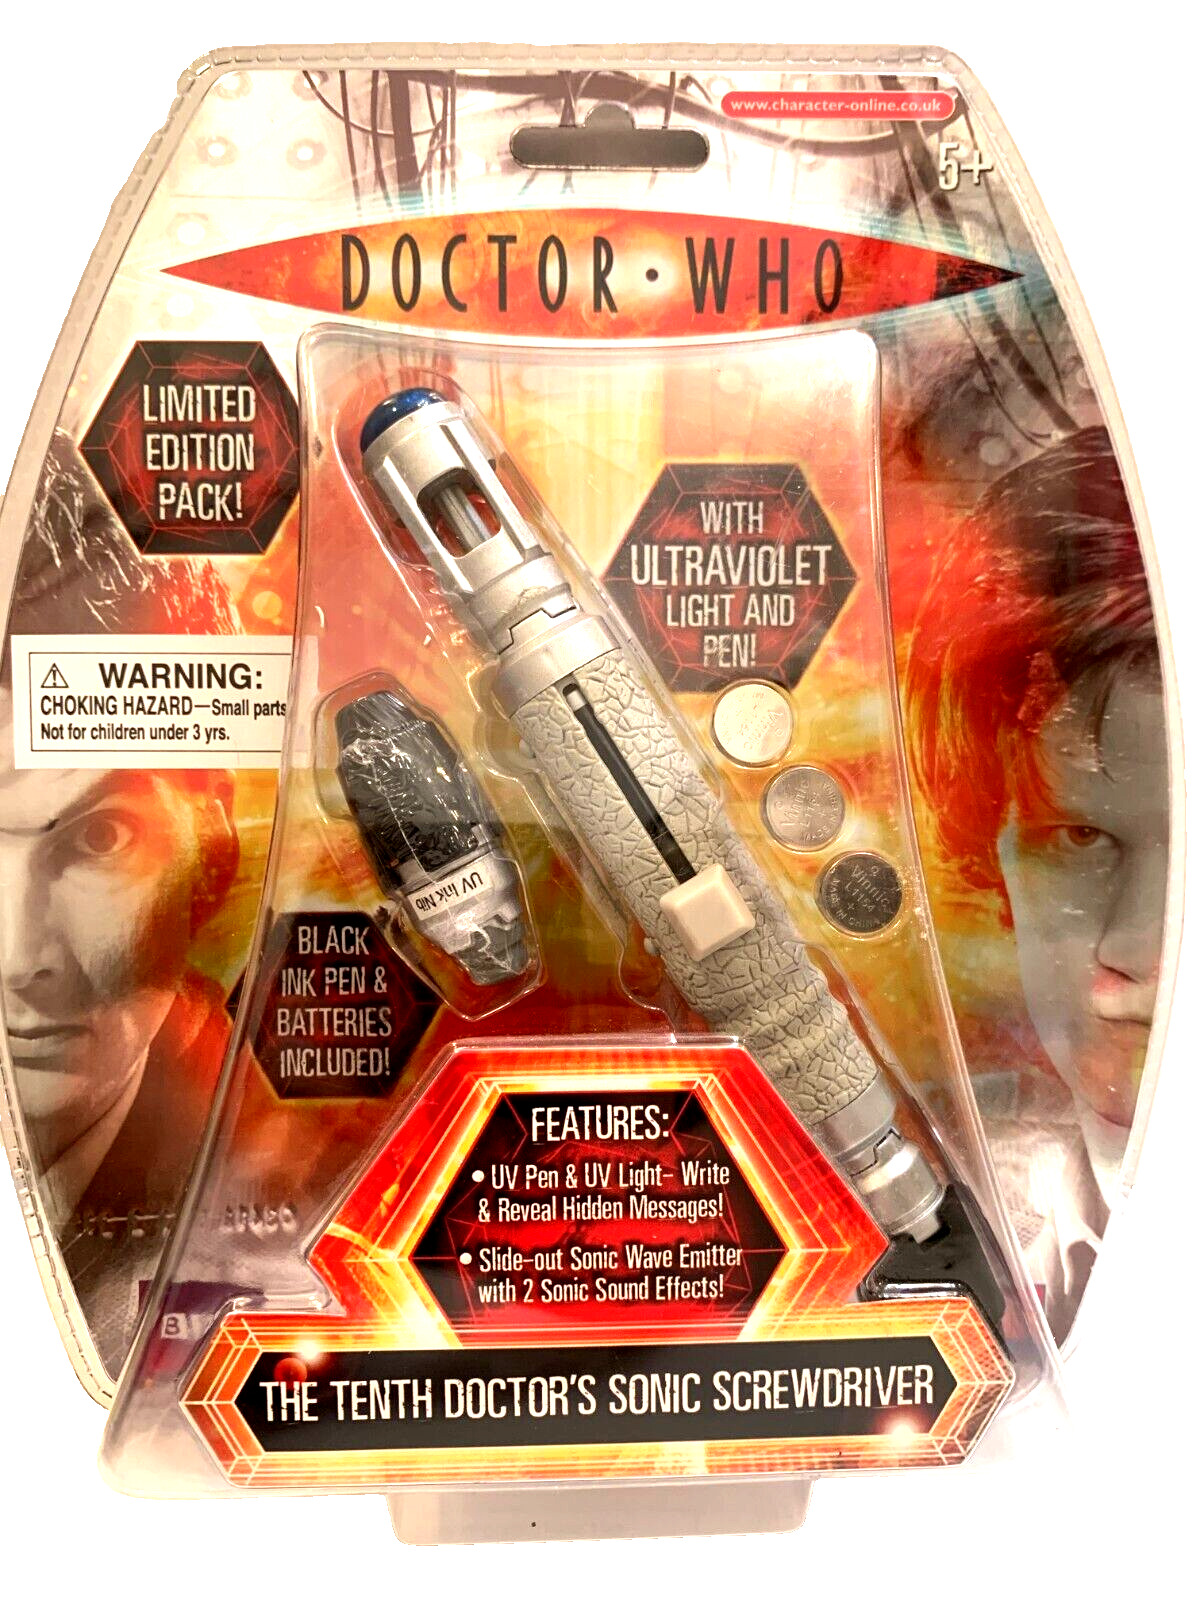 Doctor Who The Tenth Doctor's Sonic Screwdriver Limited Edition Pack 2004 BBC